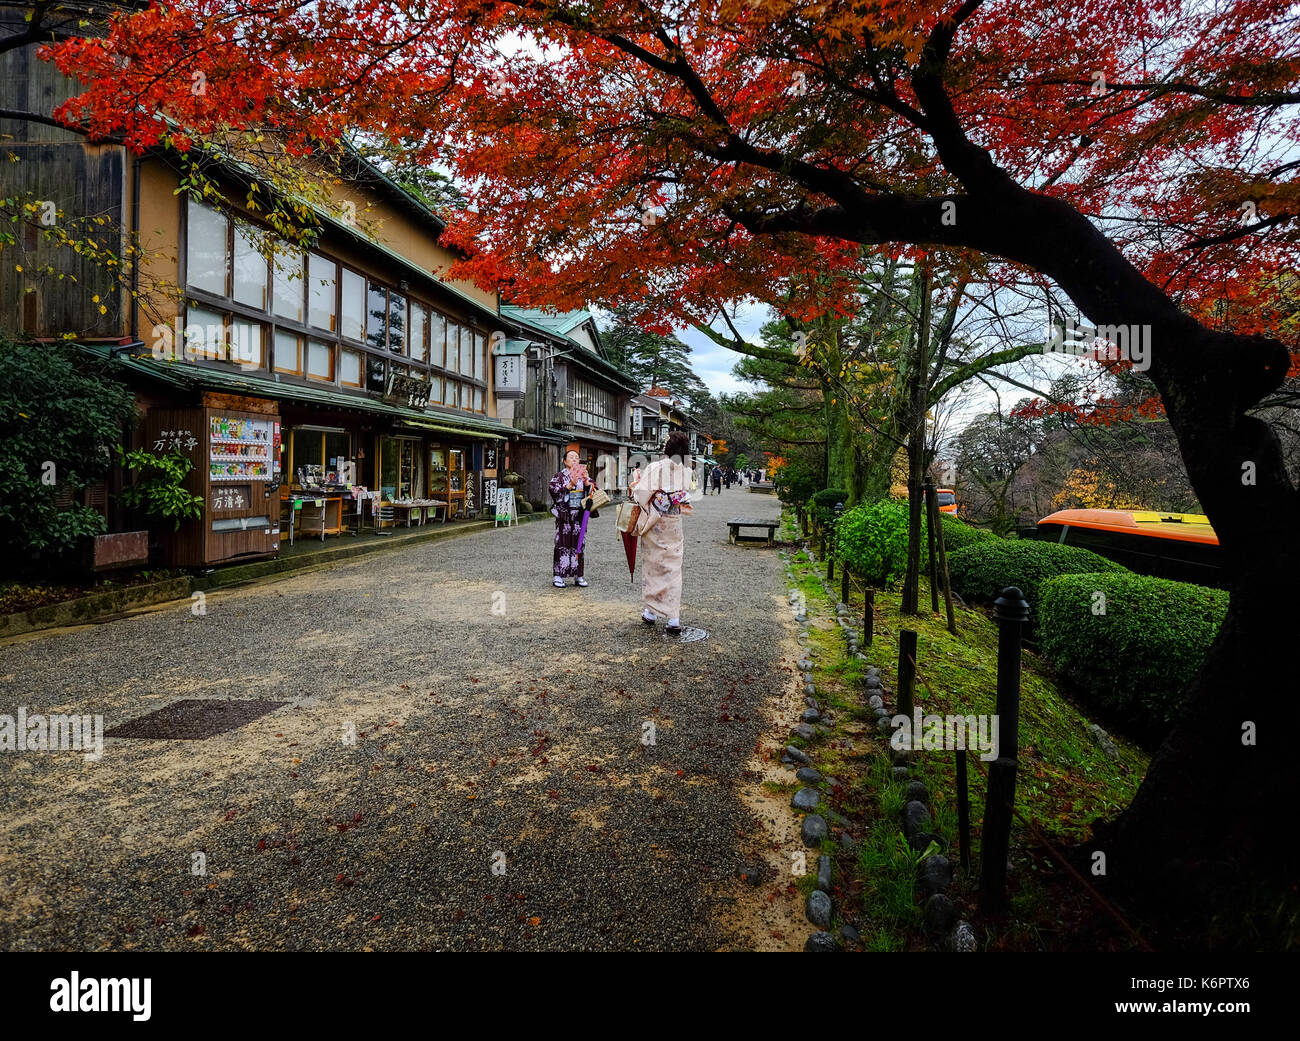 Kyoto, Japan - Nov 19, 2016. Women in kimono visit Gion Old Street in Kyoto, Japan. Kyoto served as Japan capital and the emperor residence from 794 u Stock Photo